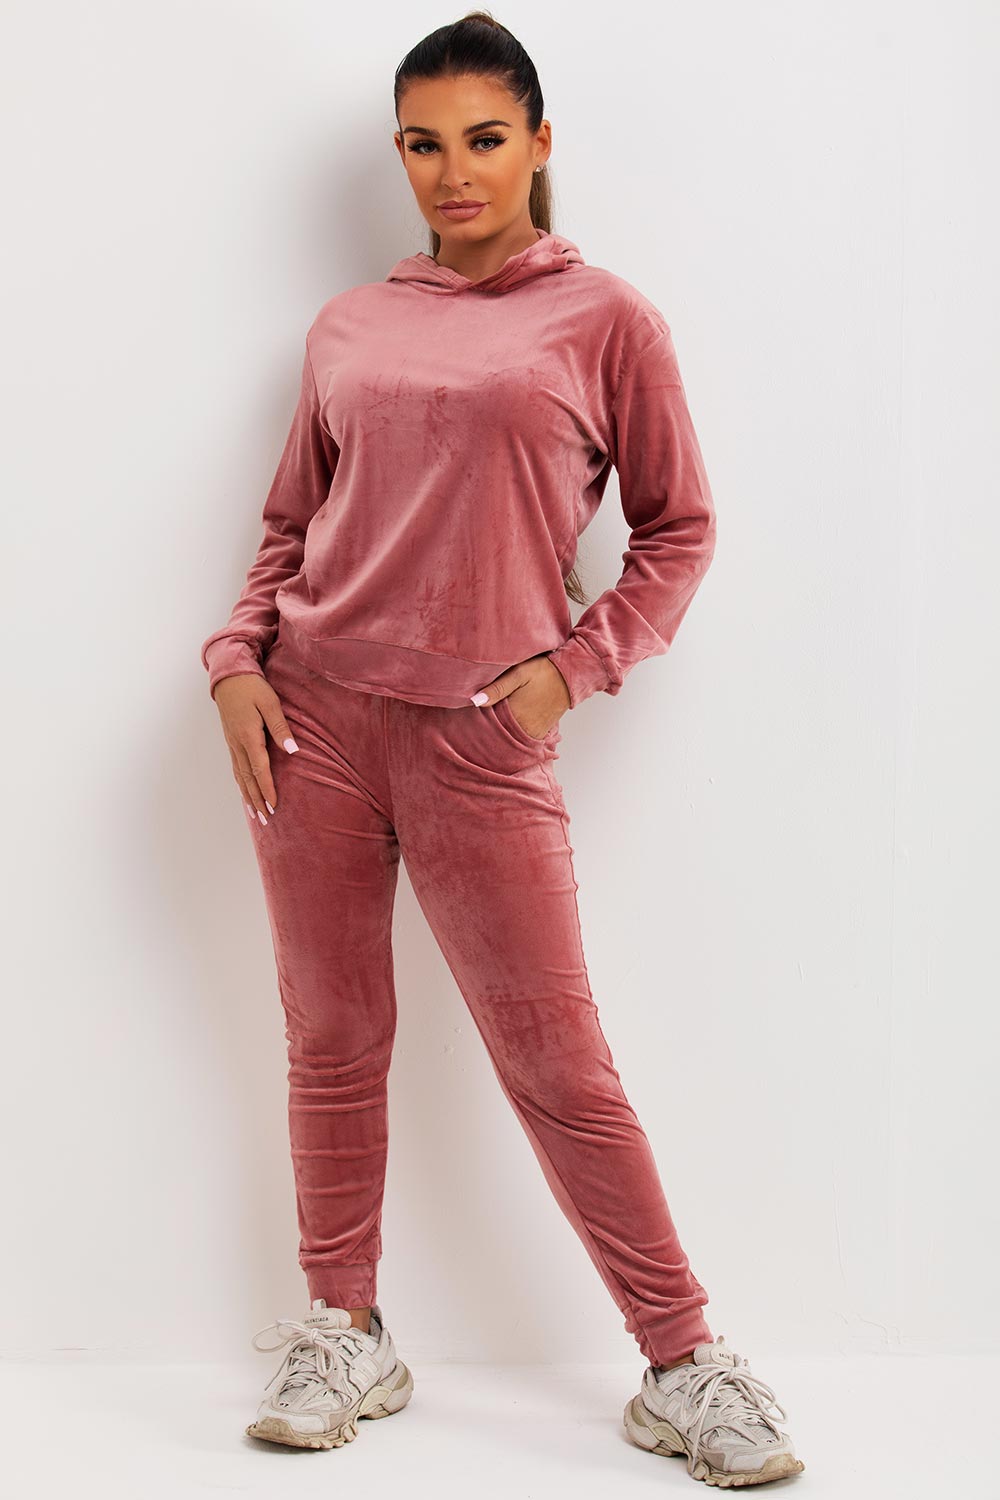 womens pink velour tracksuit juicy couture inspired loungewear co ord set